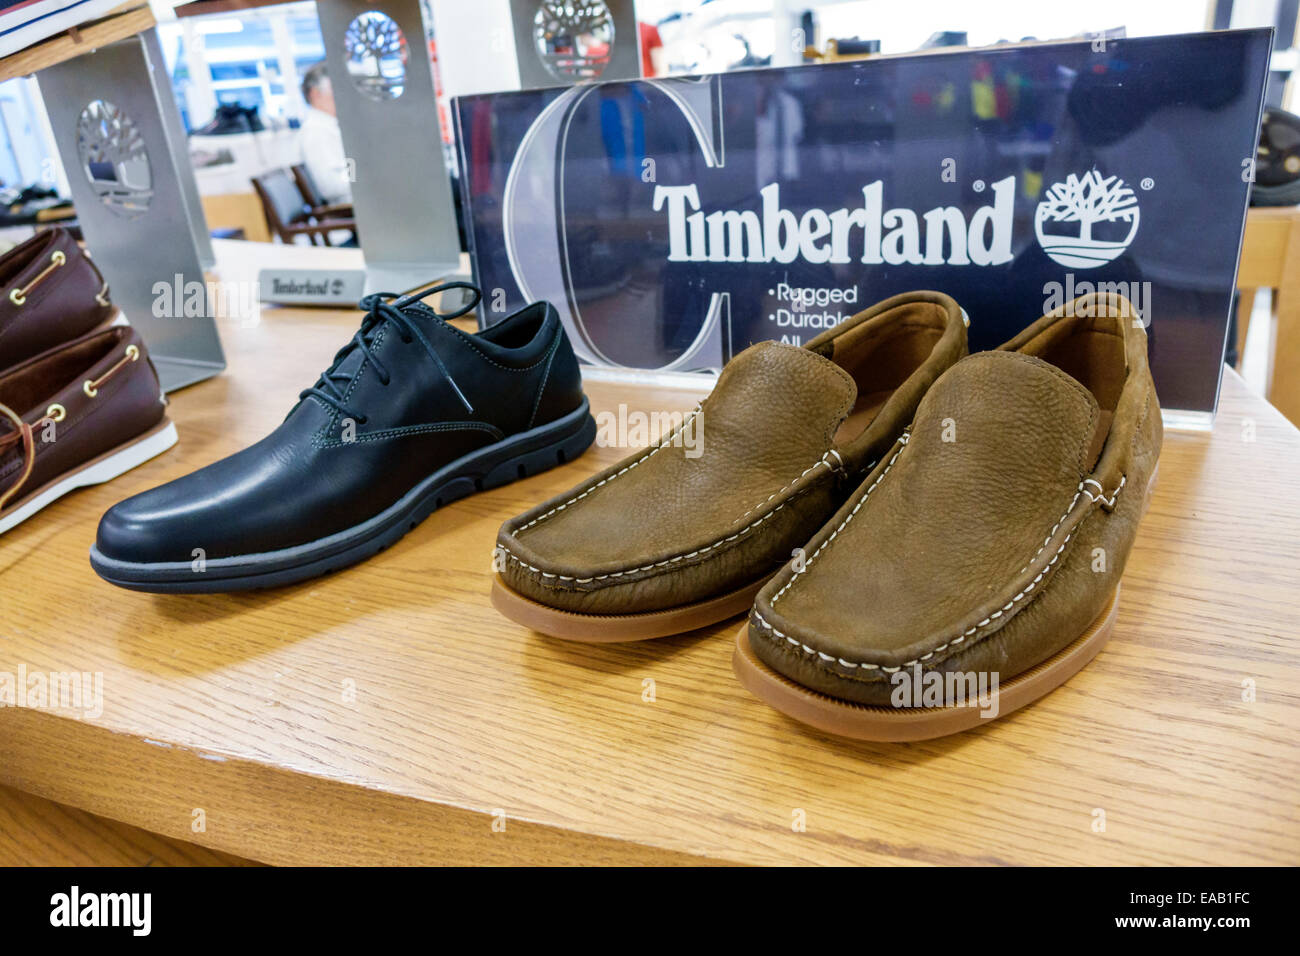 timberland shoes images with price